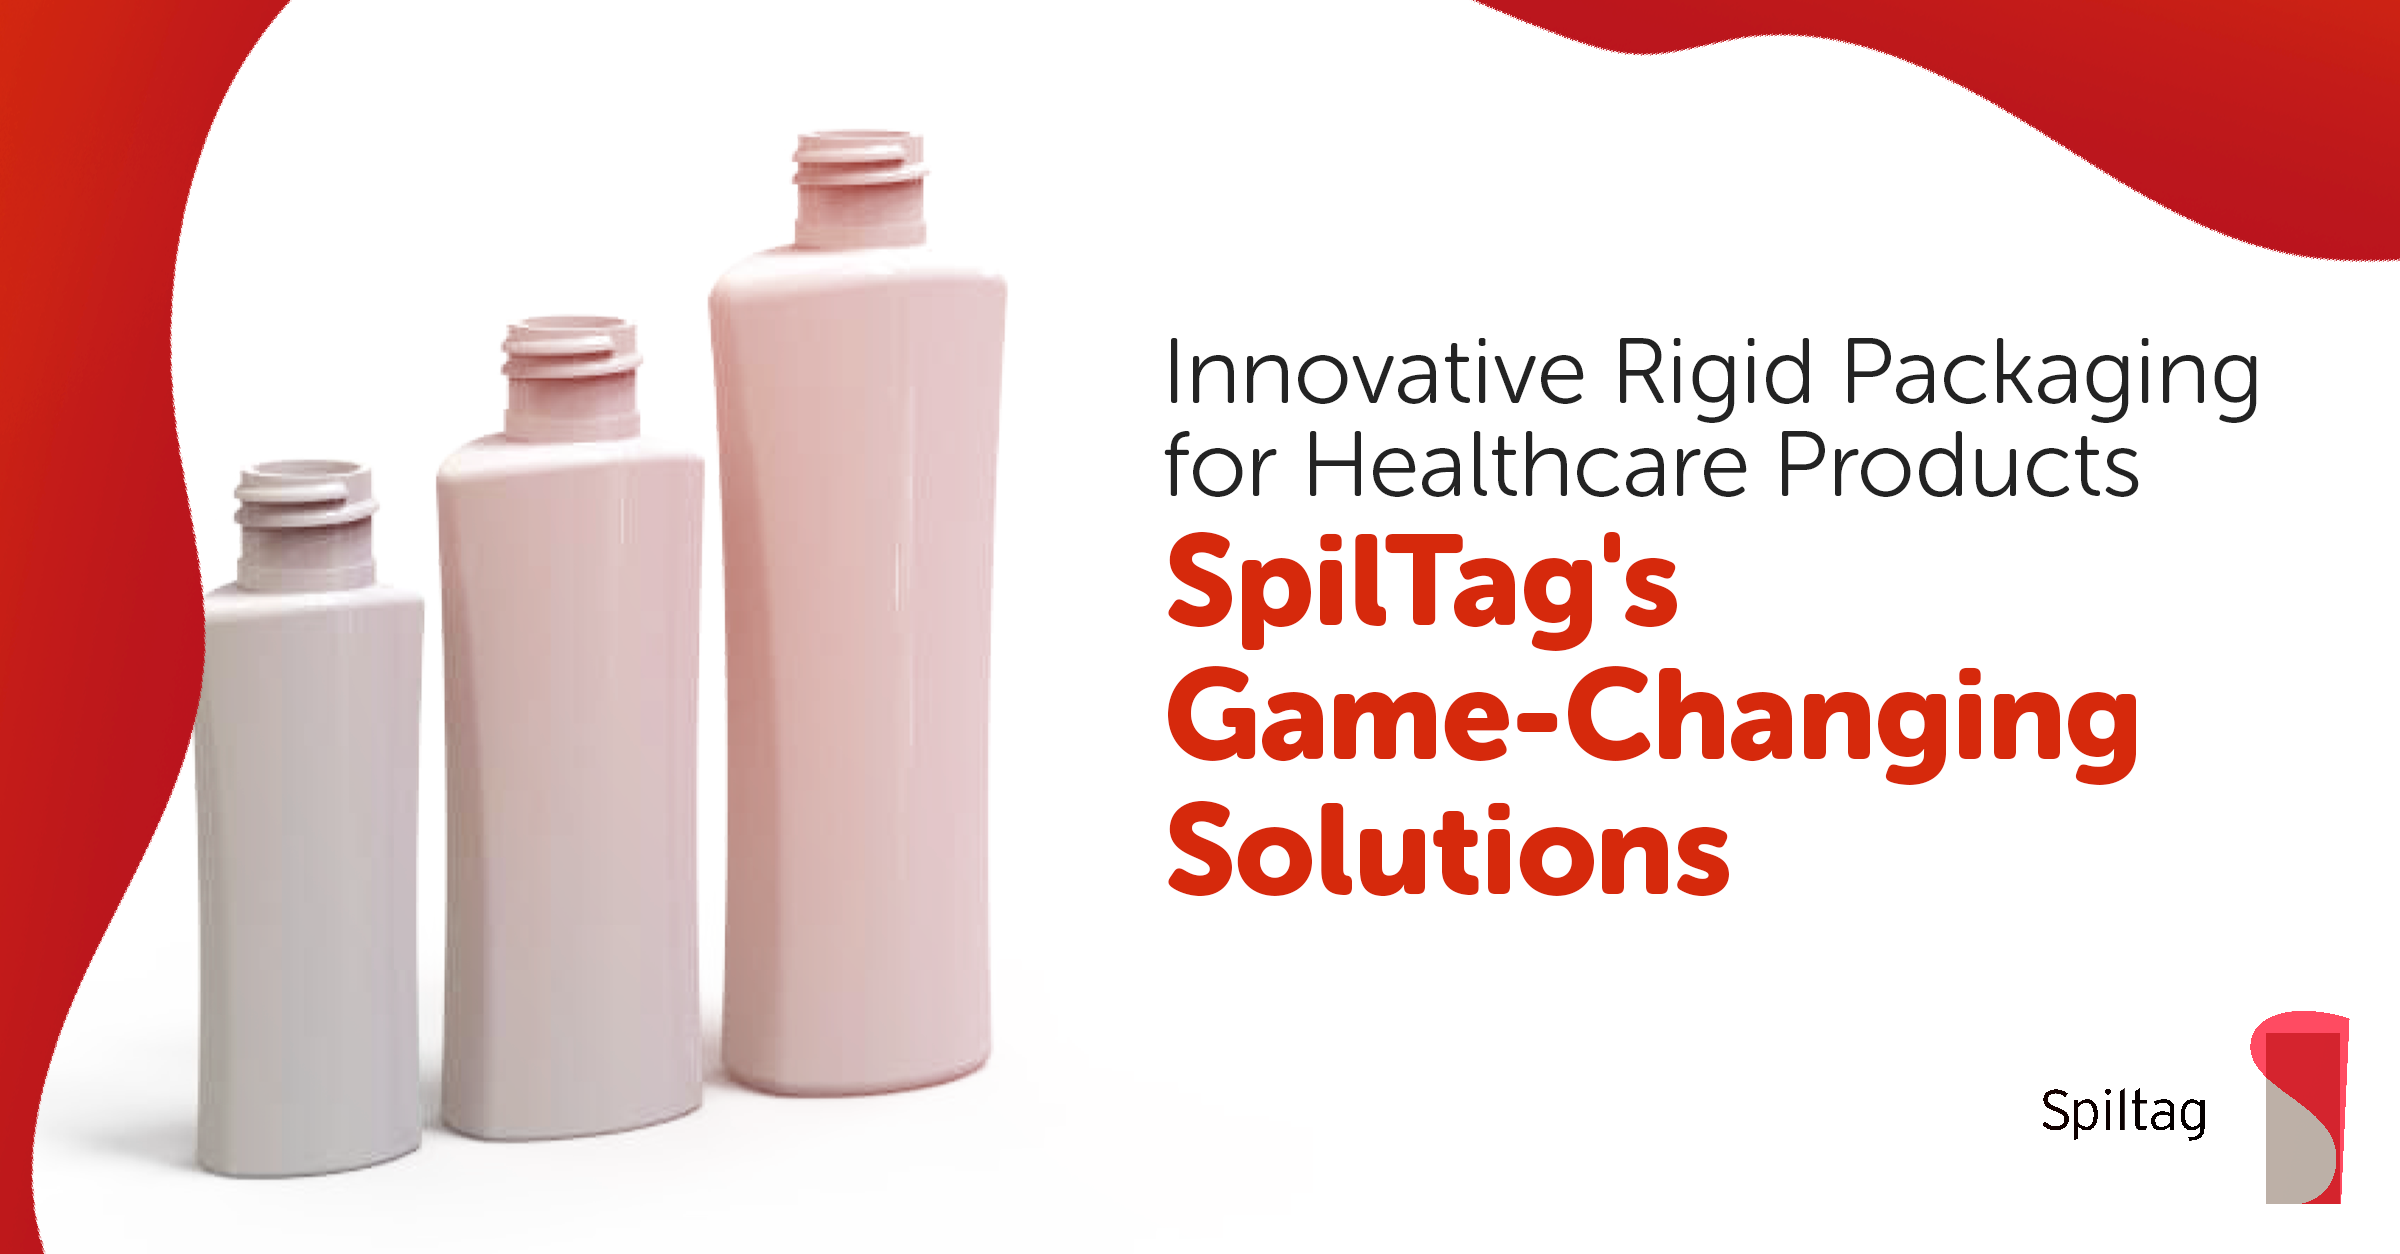 Innovative rigid packaging for healthcare